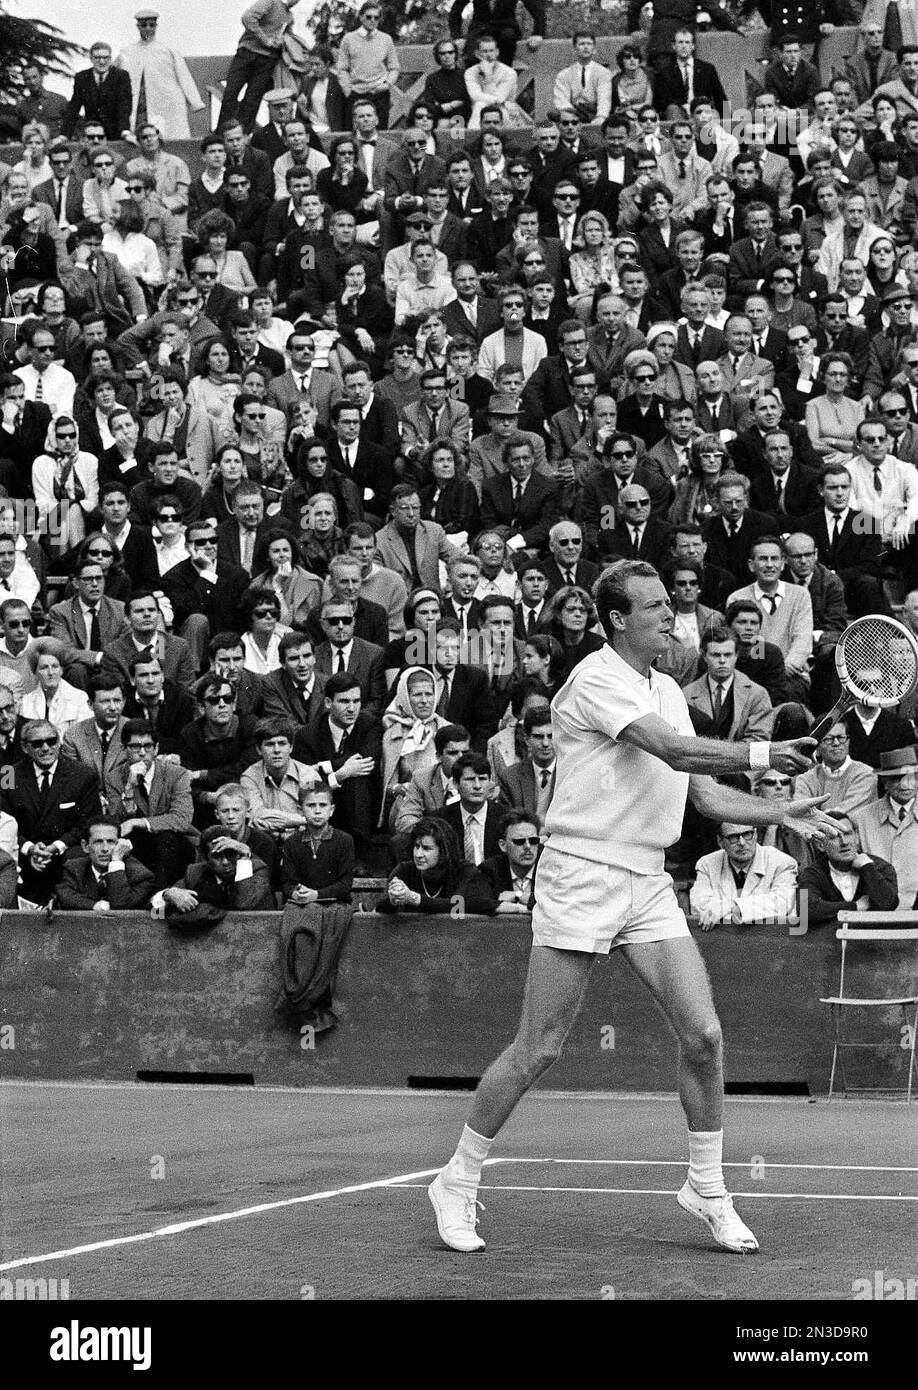 Tennis player Fred Stolle defeated Tony Roche and won the final of the  men's singles of the French tournament at Roland Garros stadium in Paris,  May 29, 1965. Both men are Australian.